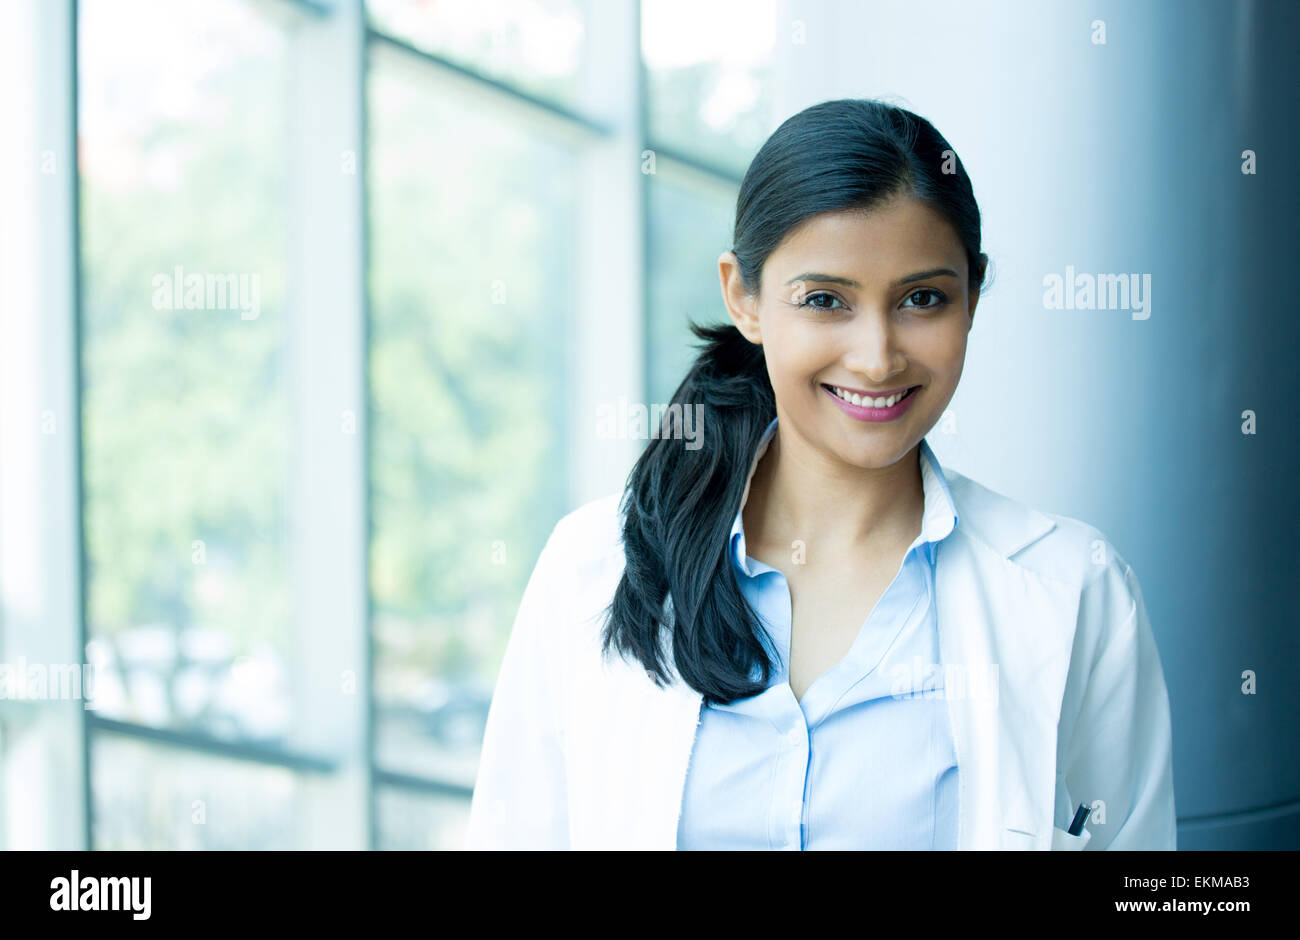 Closeup head shot portrait of friendly, cheerful, smiling confident female, healthcare professional with lab coat. Stock Photo